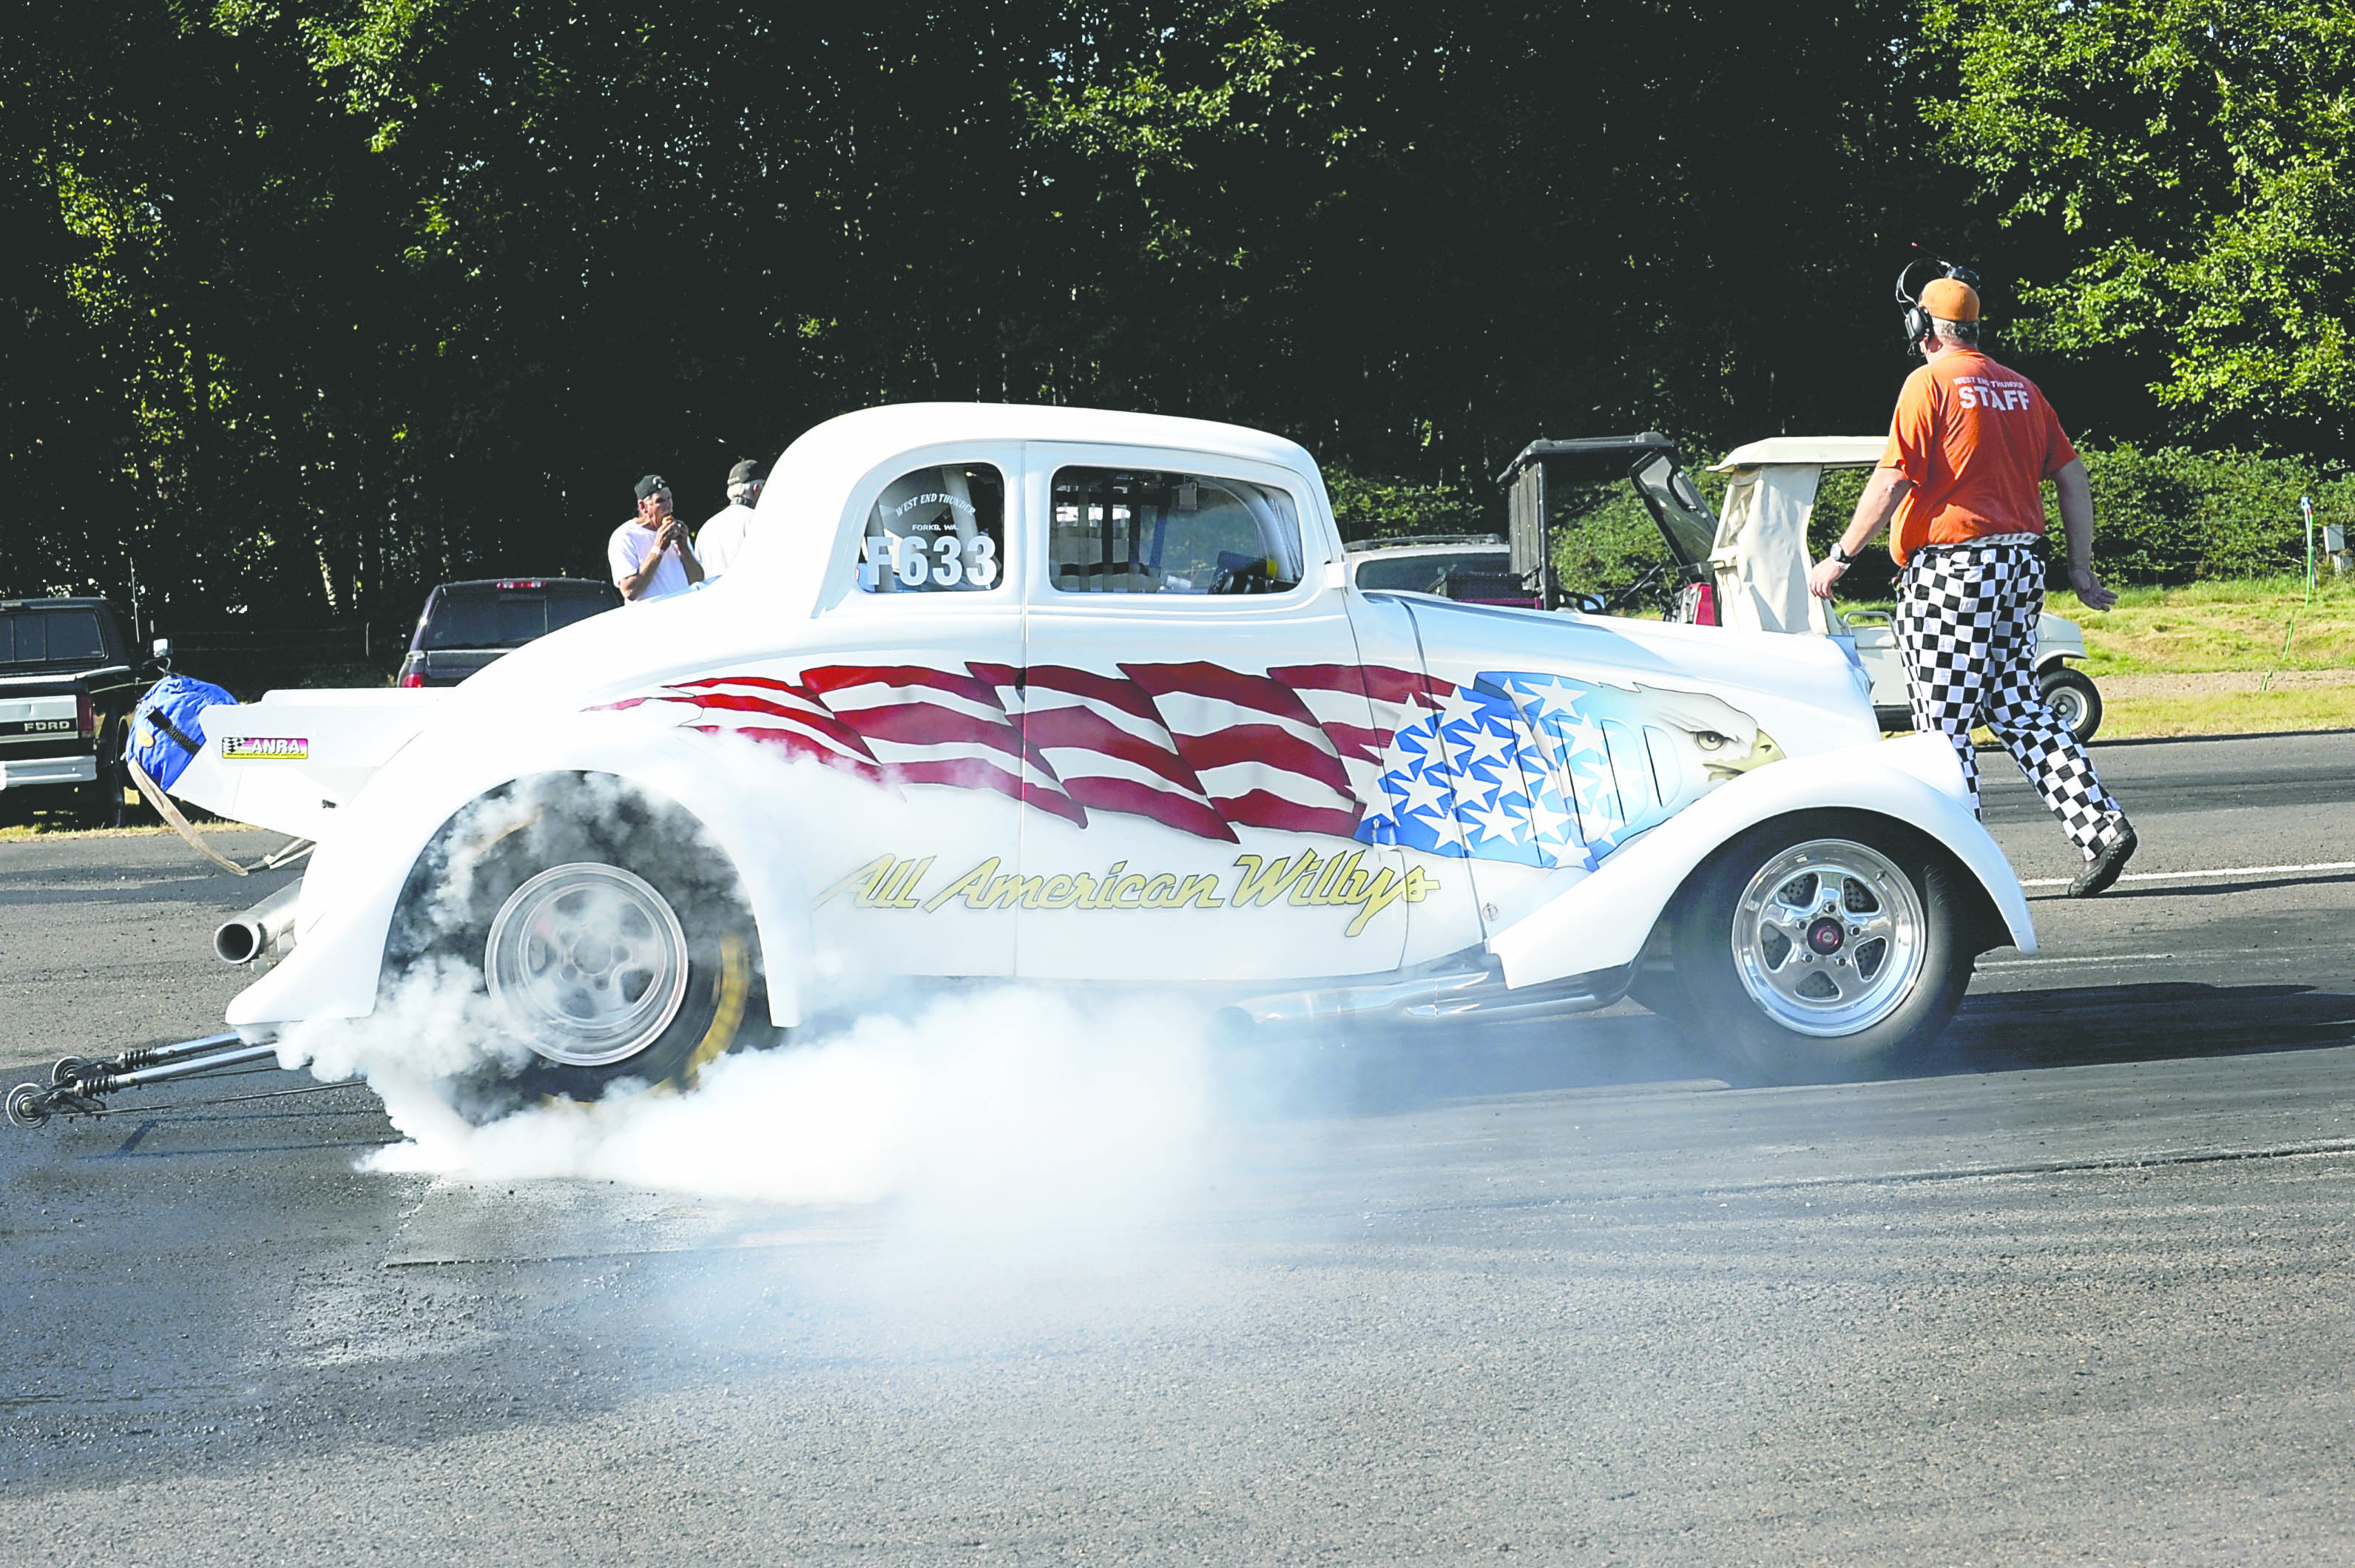 All American Willy's hotrod burns rubber as it takes off from the starting line during a West End Thunder event at Forks Municipal Airport last season.  -- Photo by Lonnie Archibald/for Peninsula Daily News